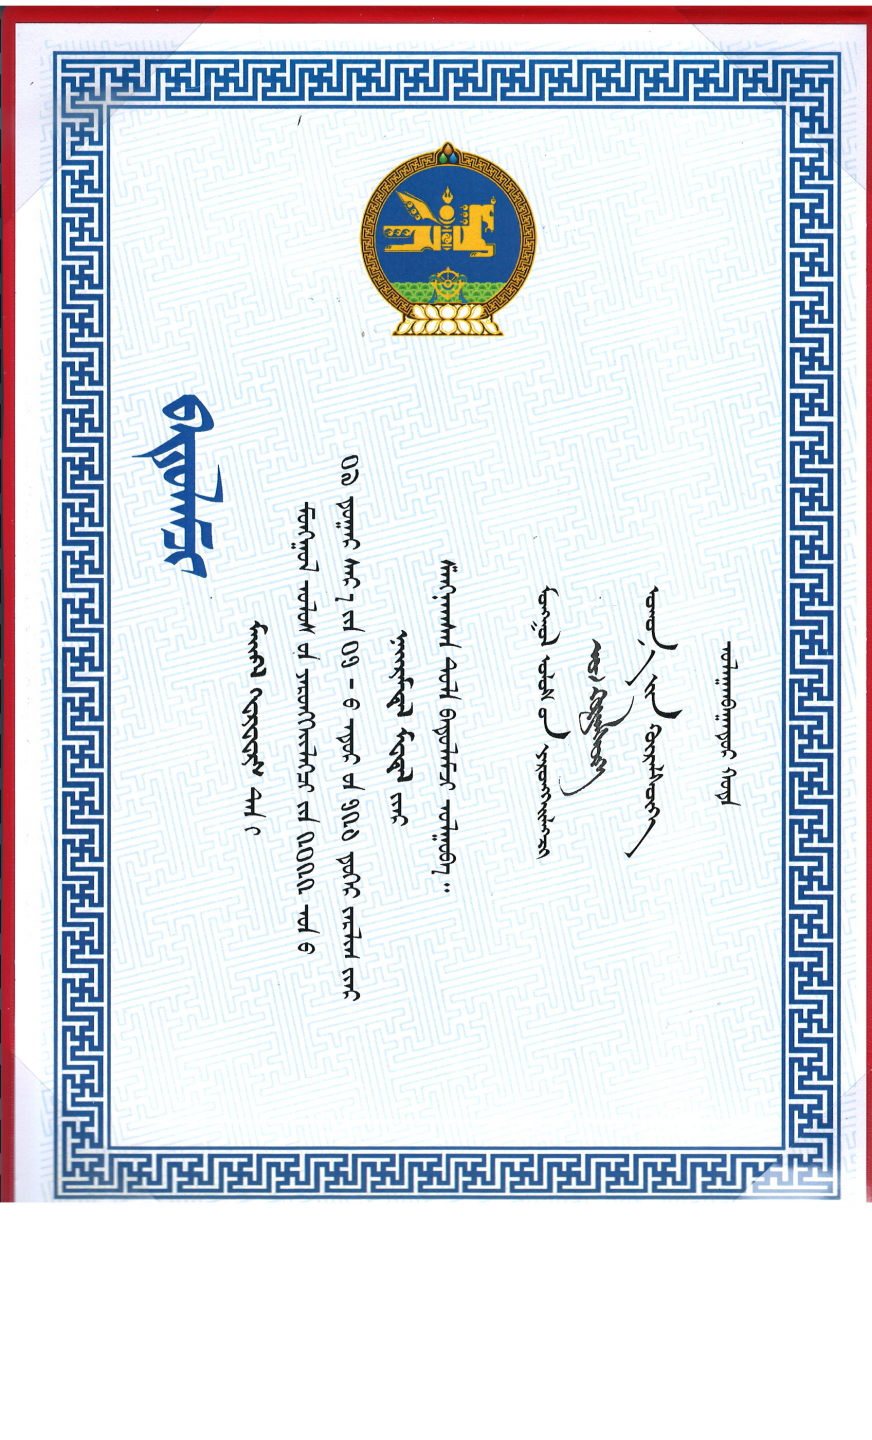 Scanned image of the Mongolian language certificate for Prof Gervers's Friendship Medal